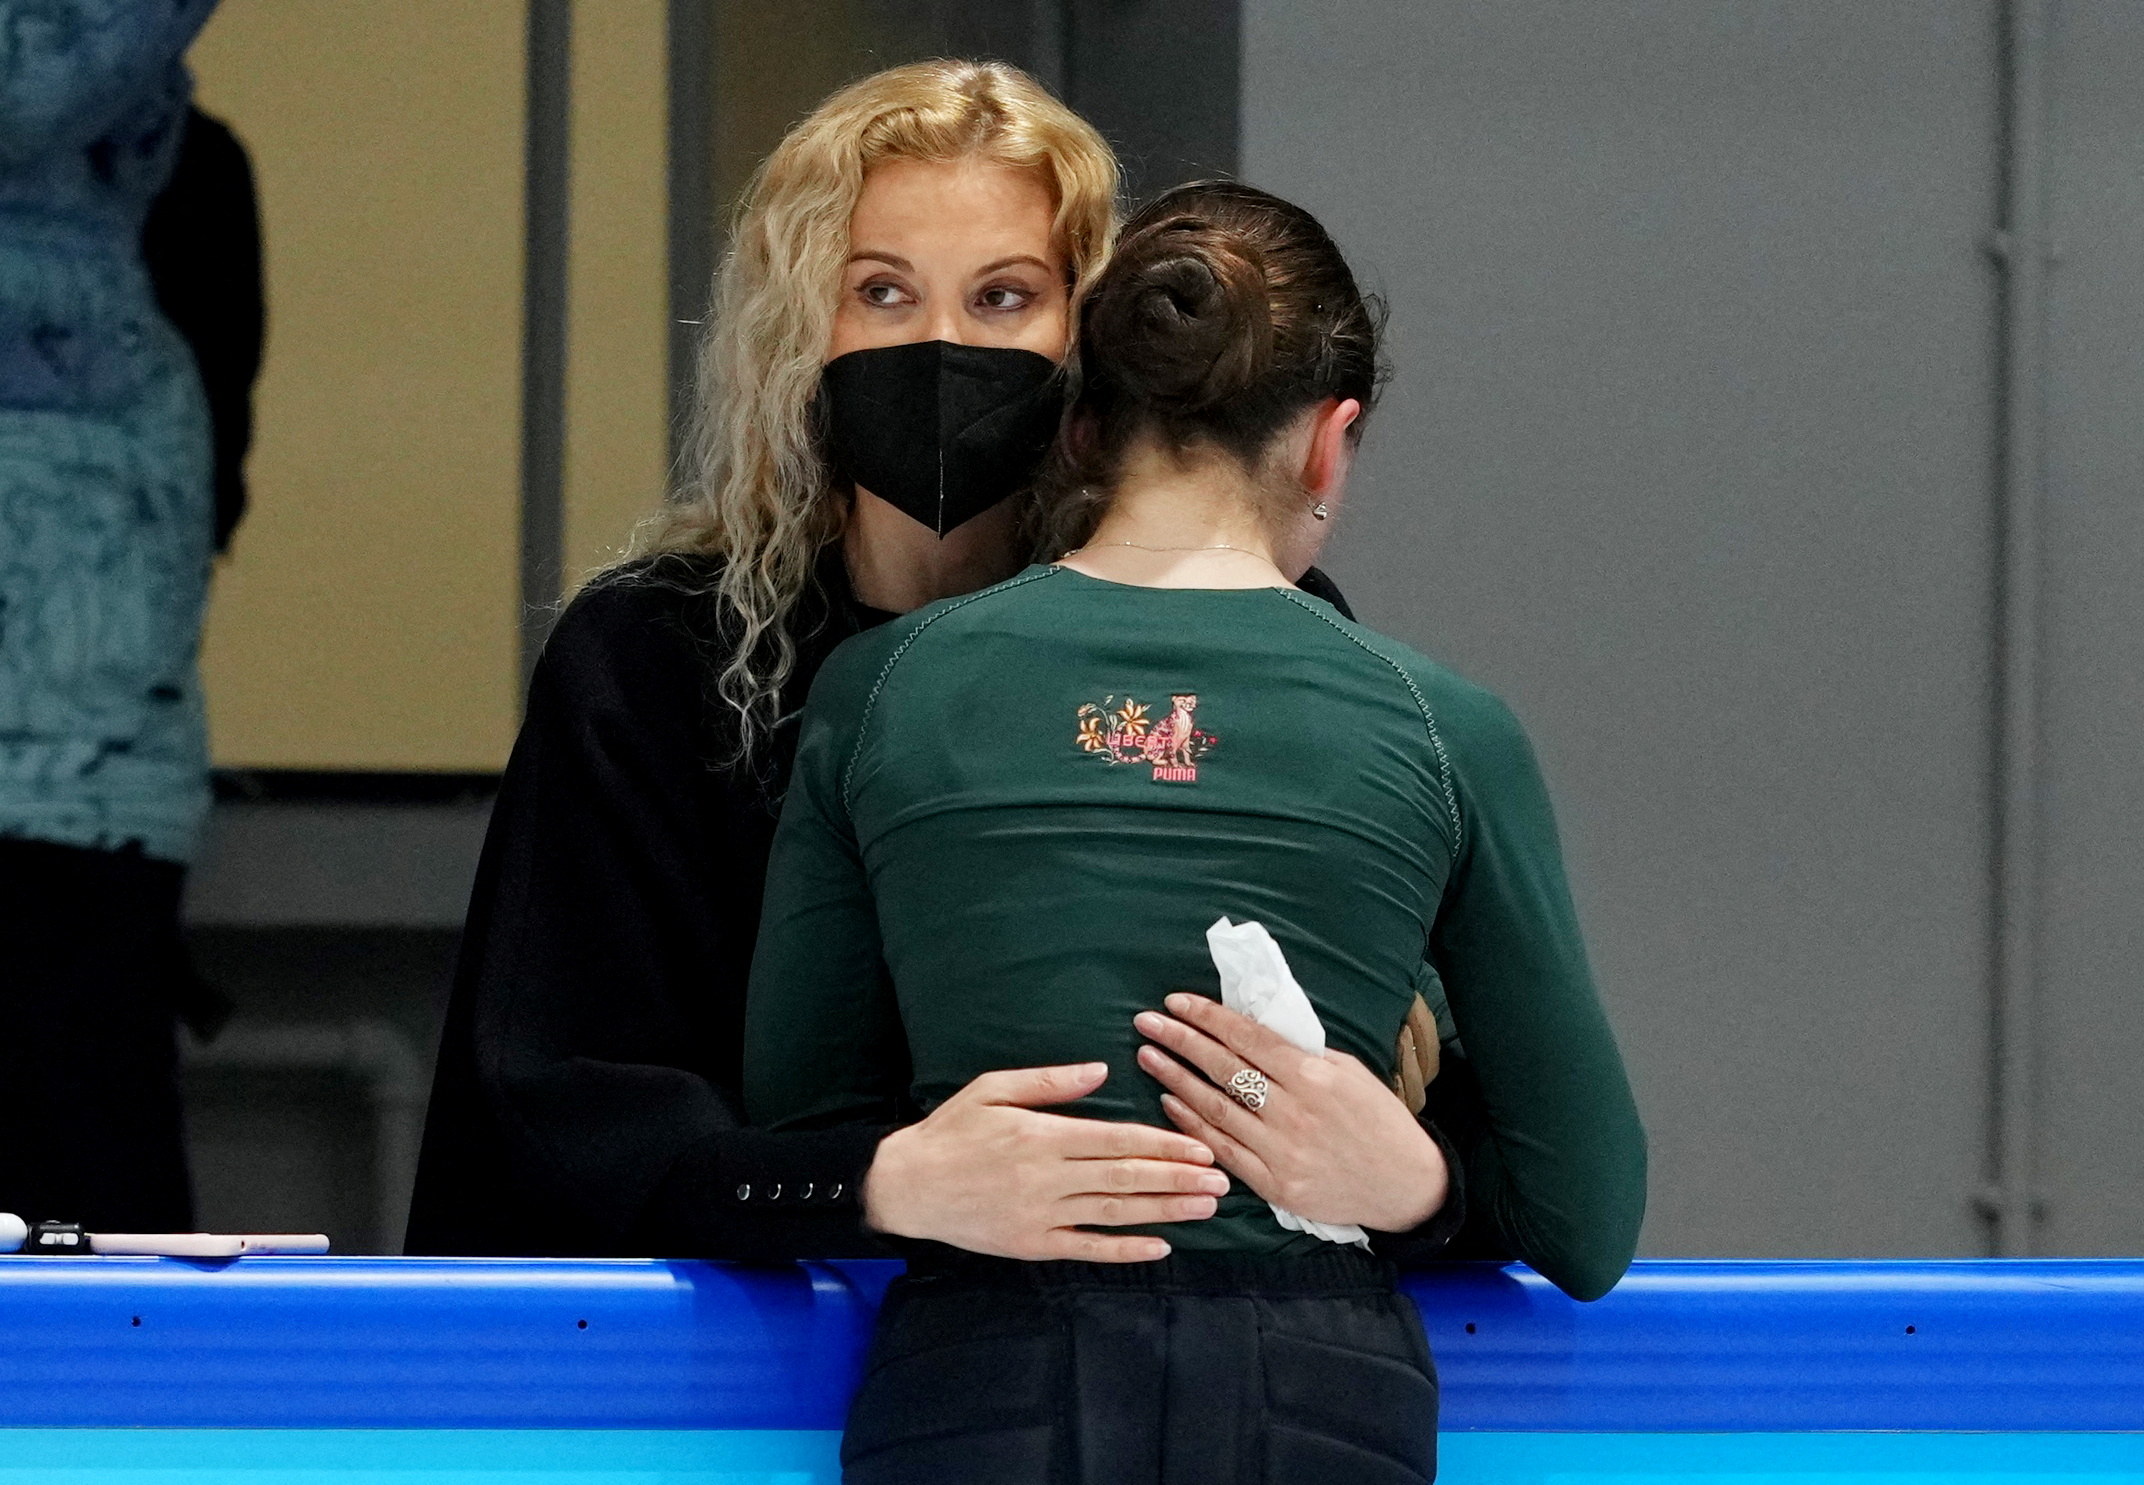 - February 12, 2022. Kamila Valieva of the Russian Olympic Committee during training with the Russian Olympic Committee coach Eteri Tutberidze 